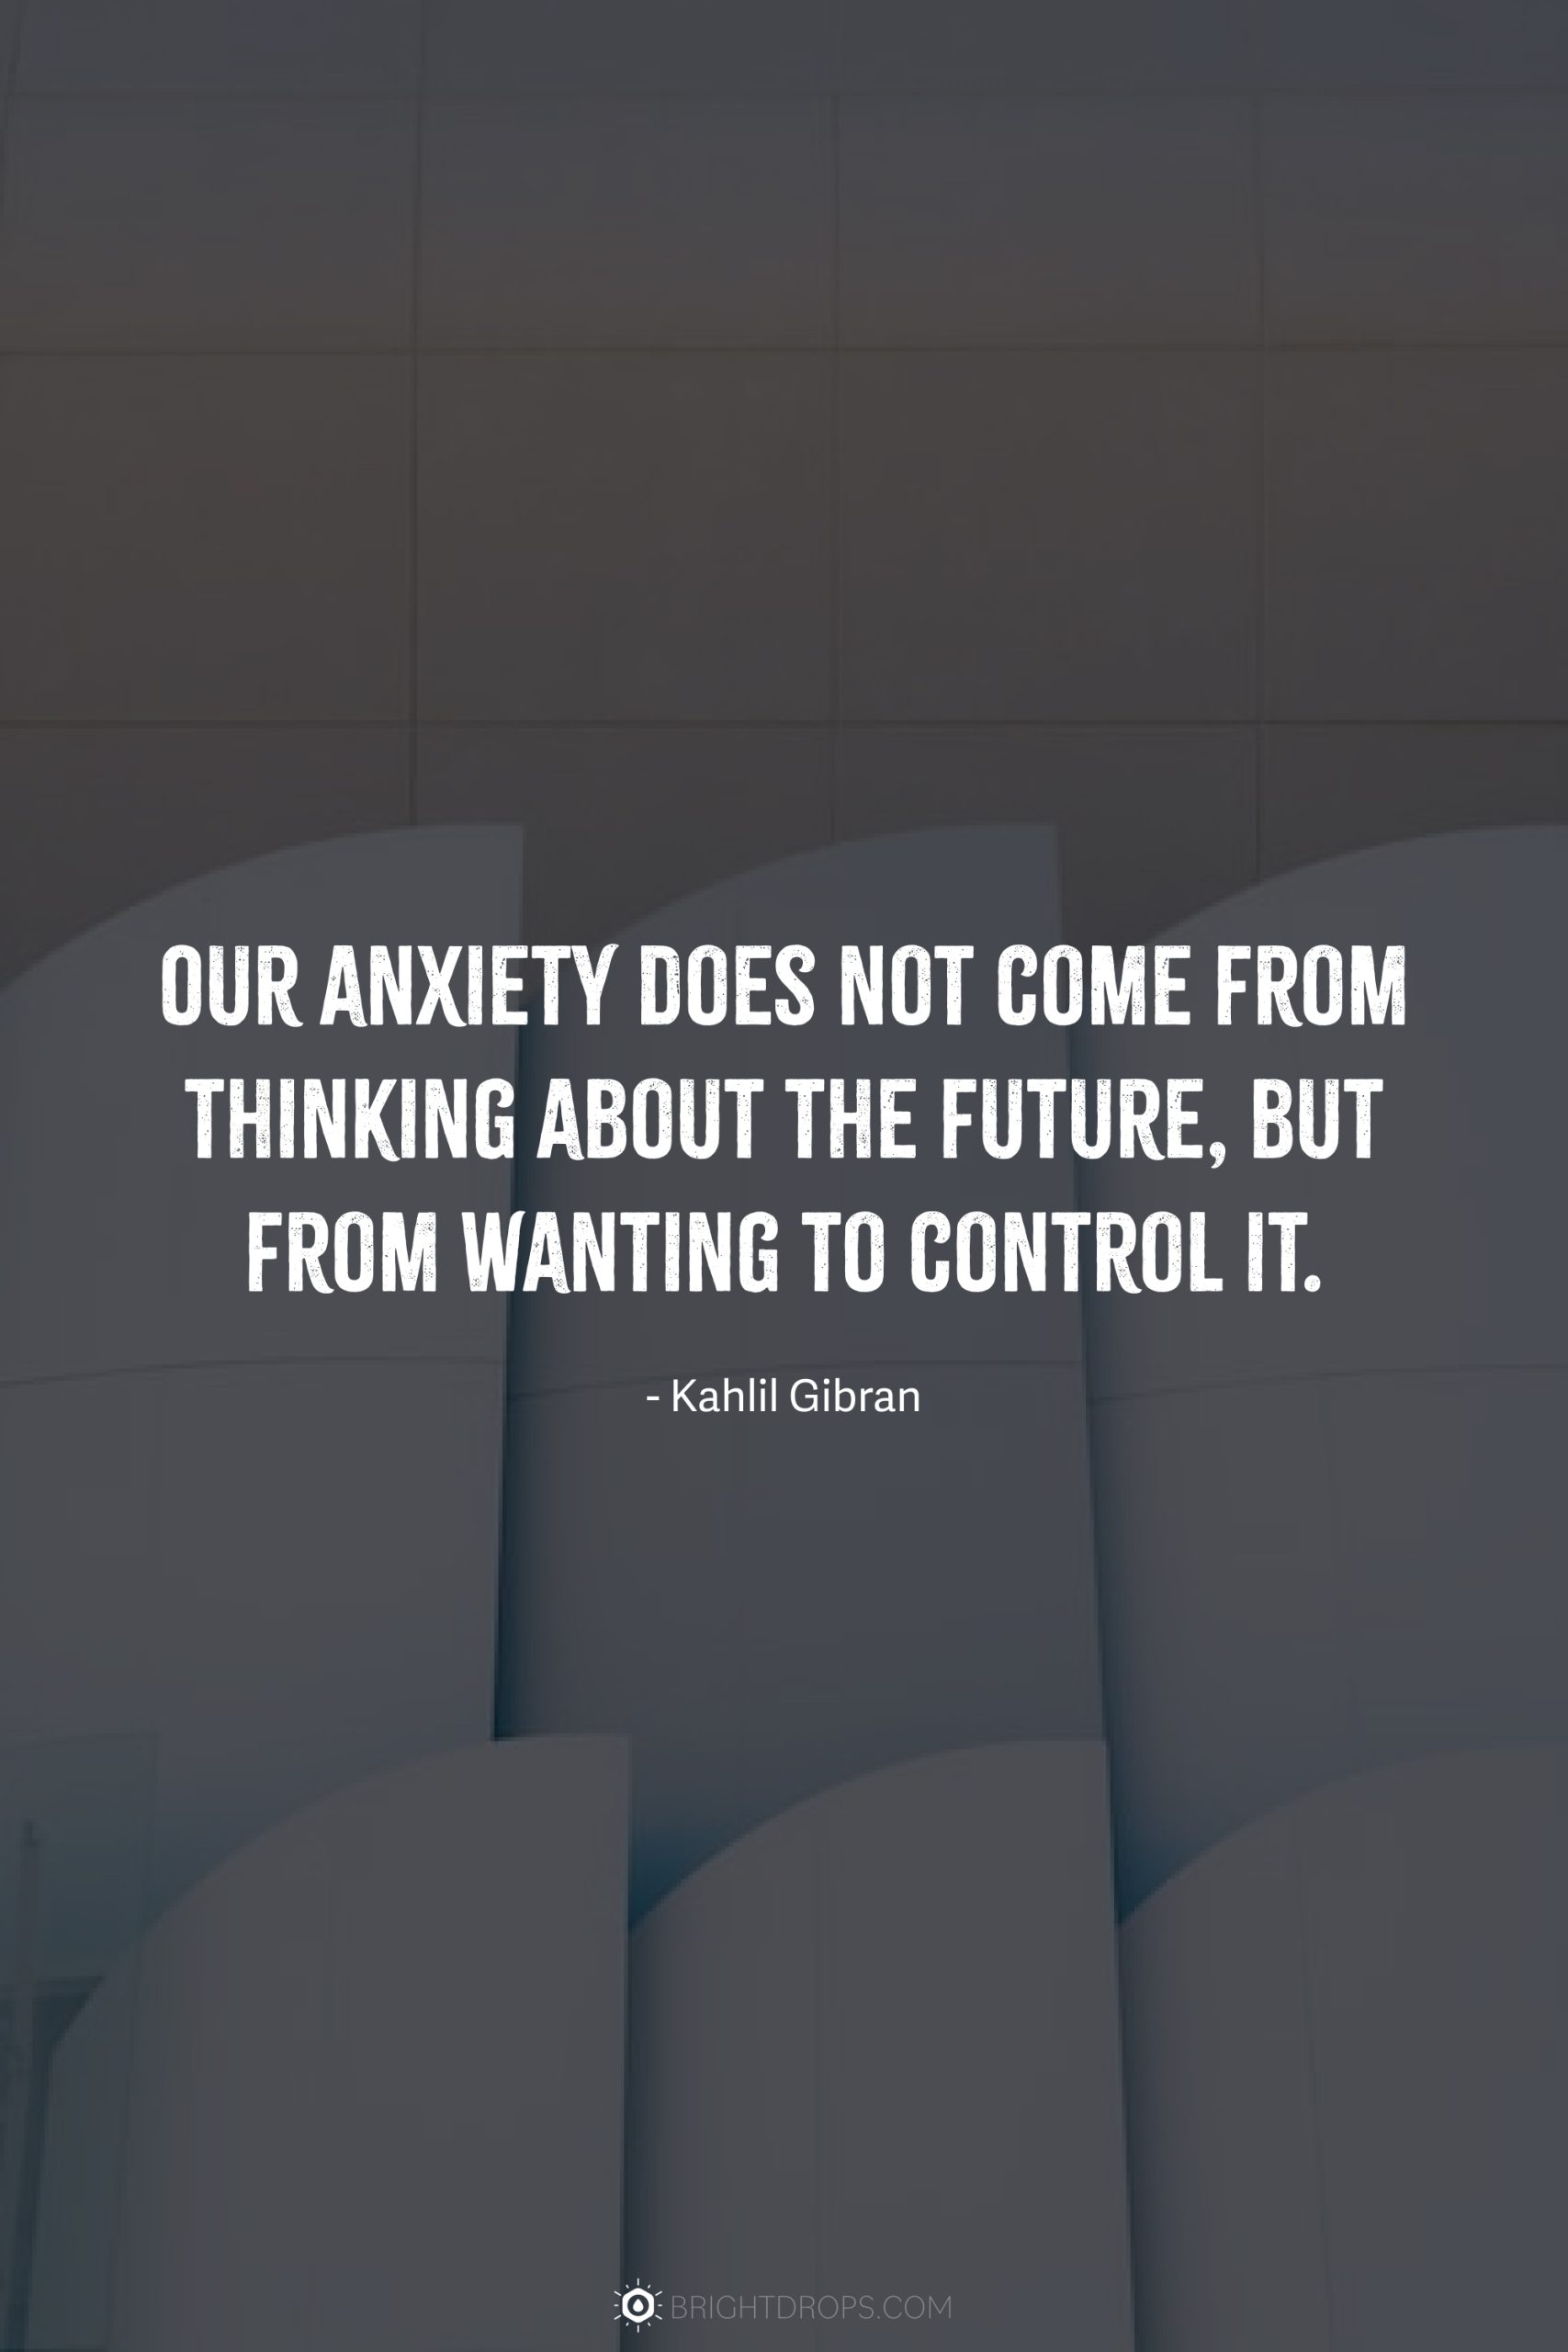 Our anxiety does not come from thinking about the future, but from wanting to control it.